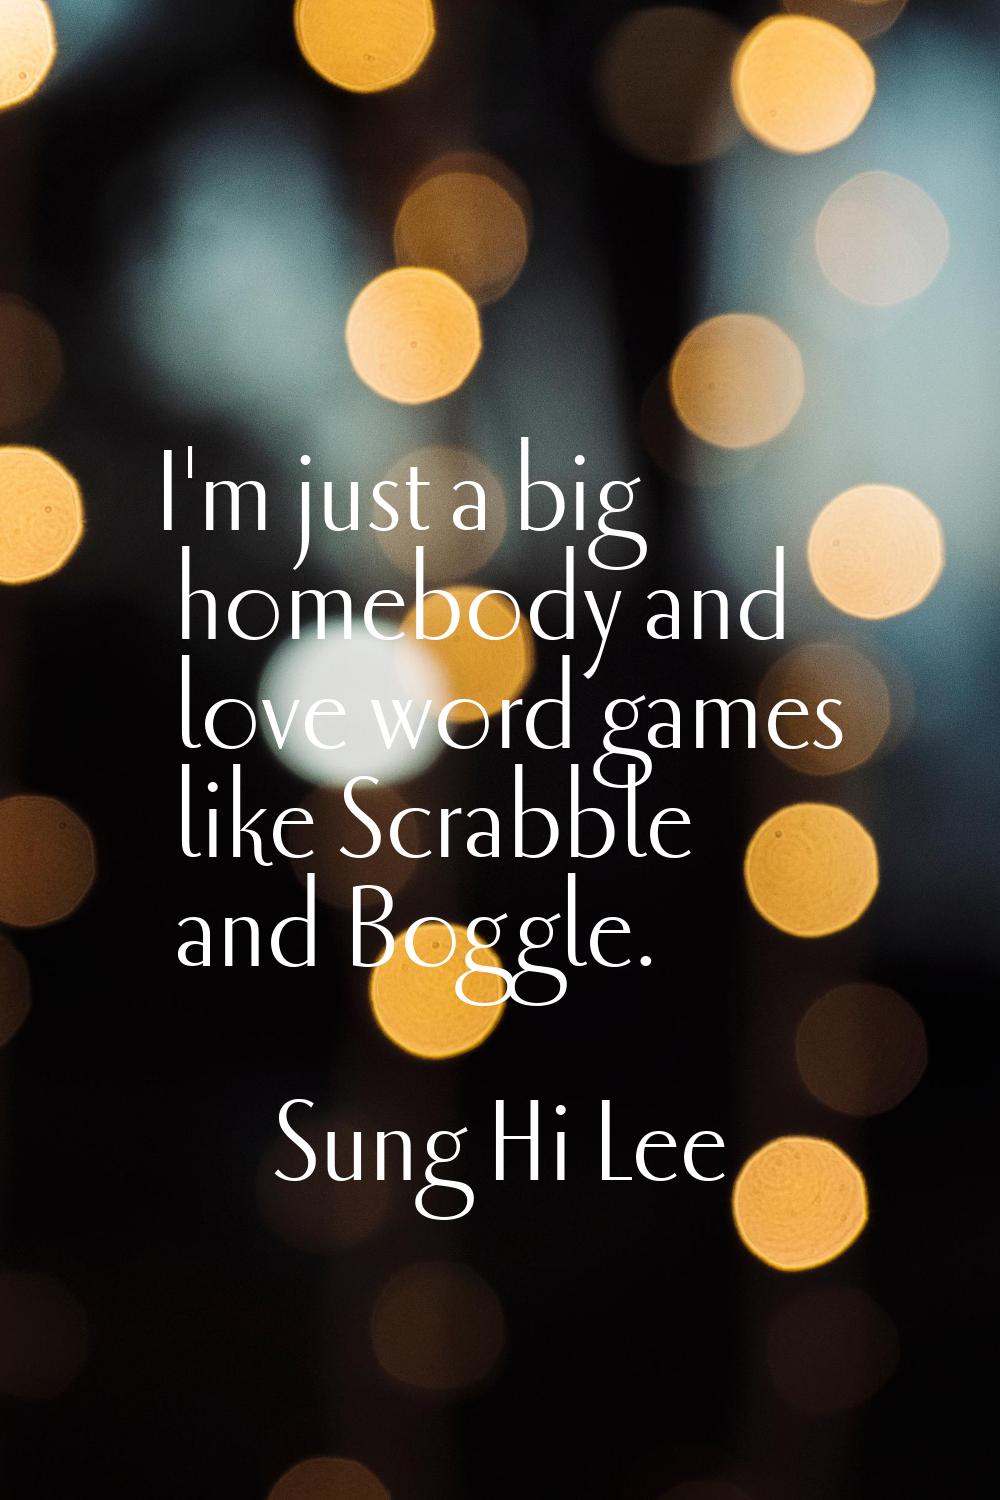 I'm just a big homebody and love word games like Scrabble and Boggle.